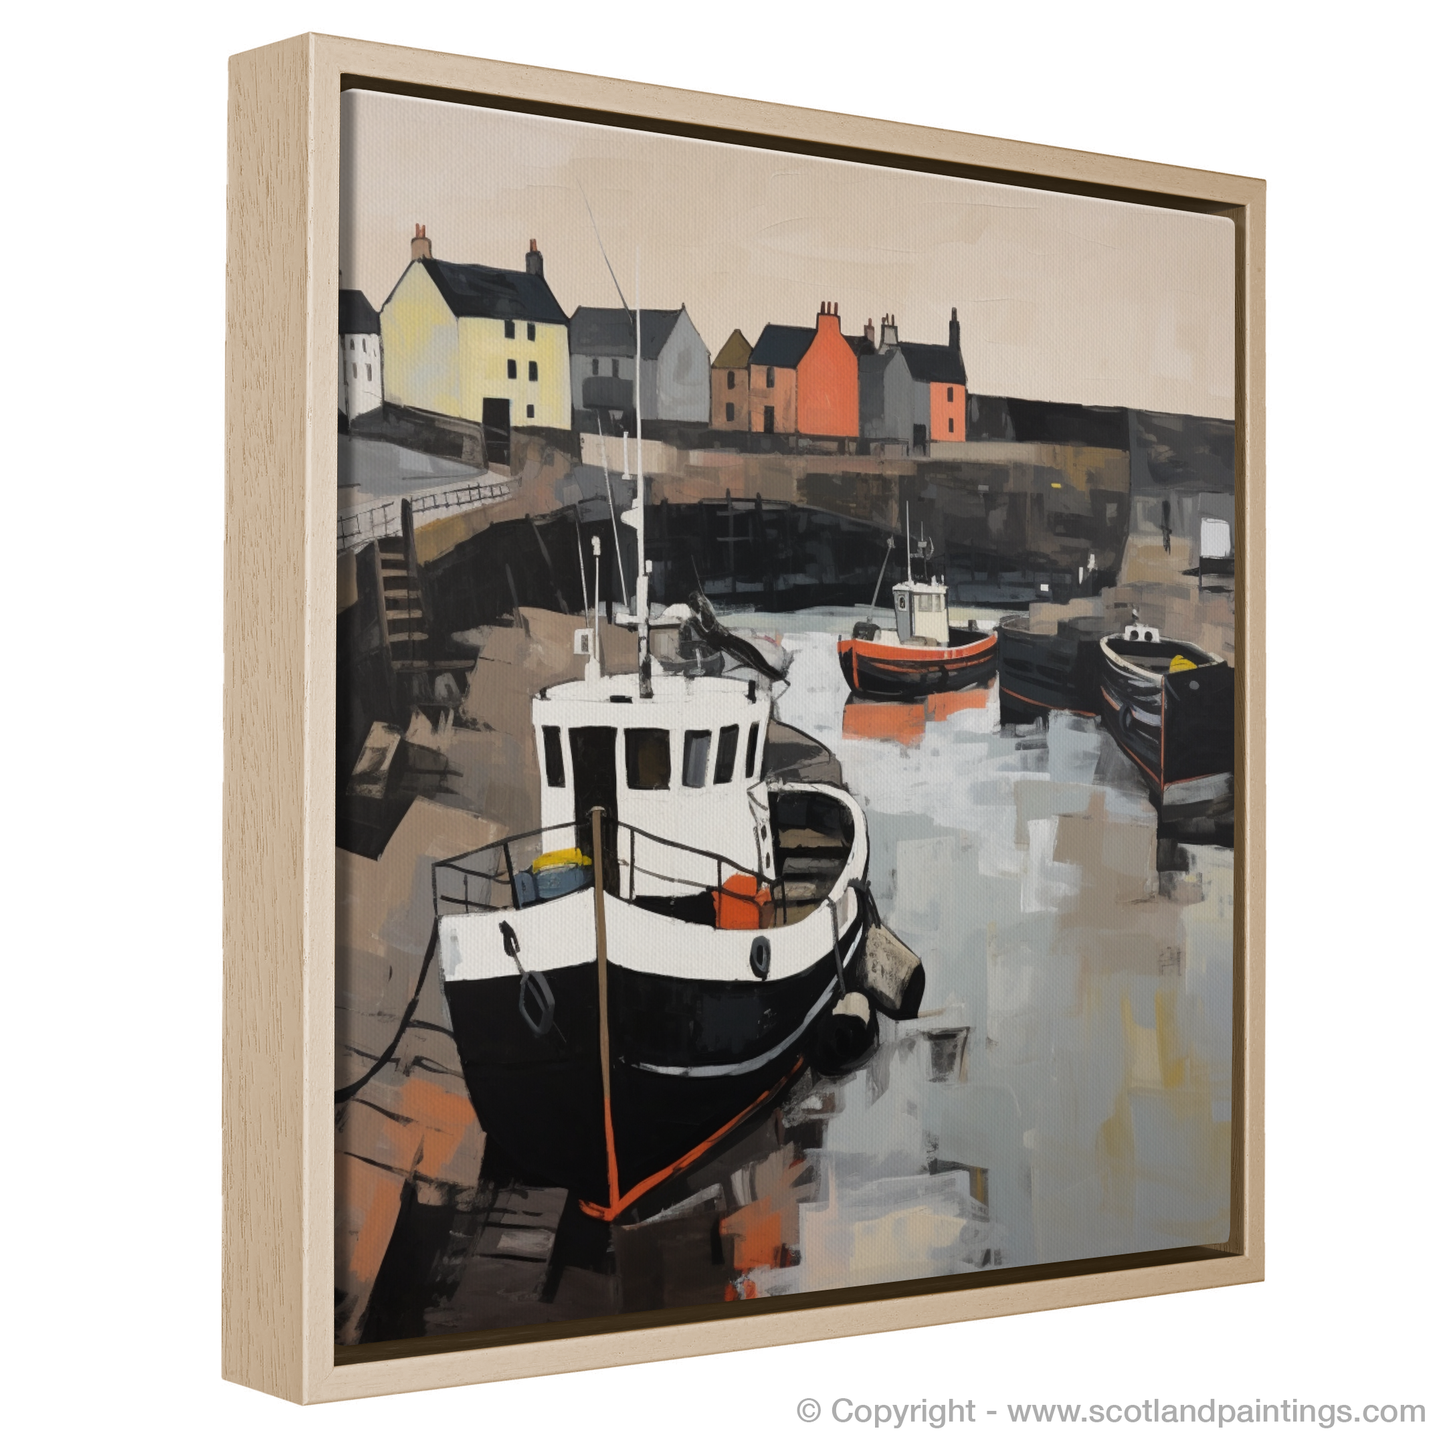 Painting and Art Print of Eyemouth Harbour entitled "Vivid Expressions of Eyemouth Harbour".